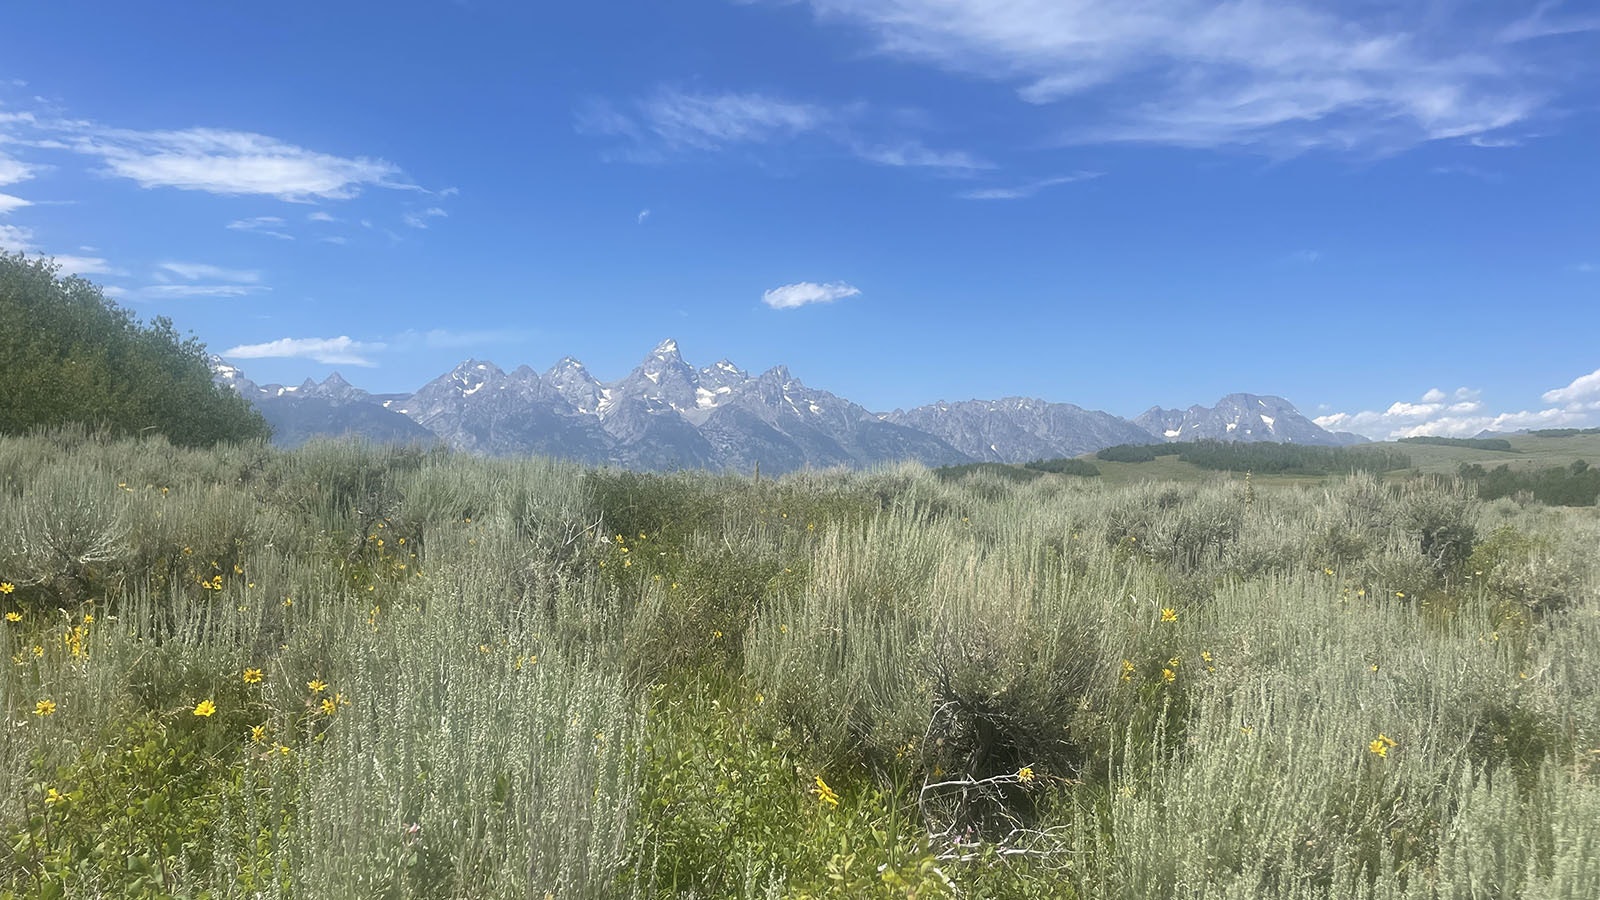 The Kelly parcel is 640 pristine acres of public land in Grand Teton National Park that could hit the auction block.